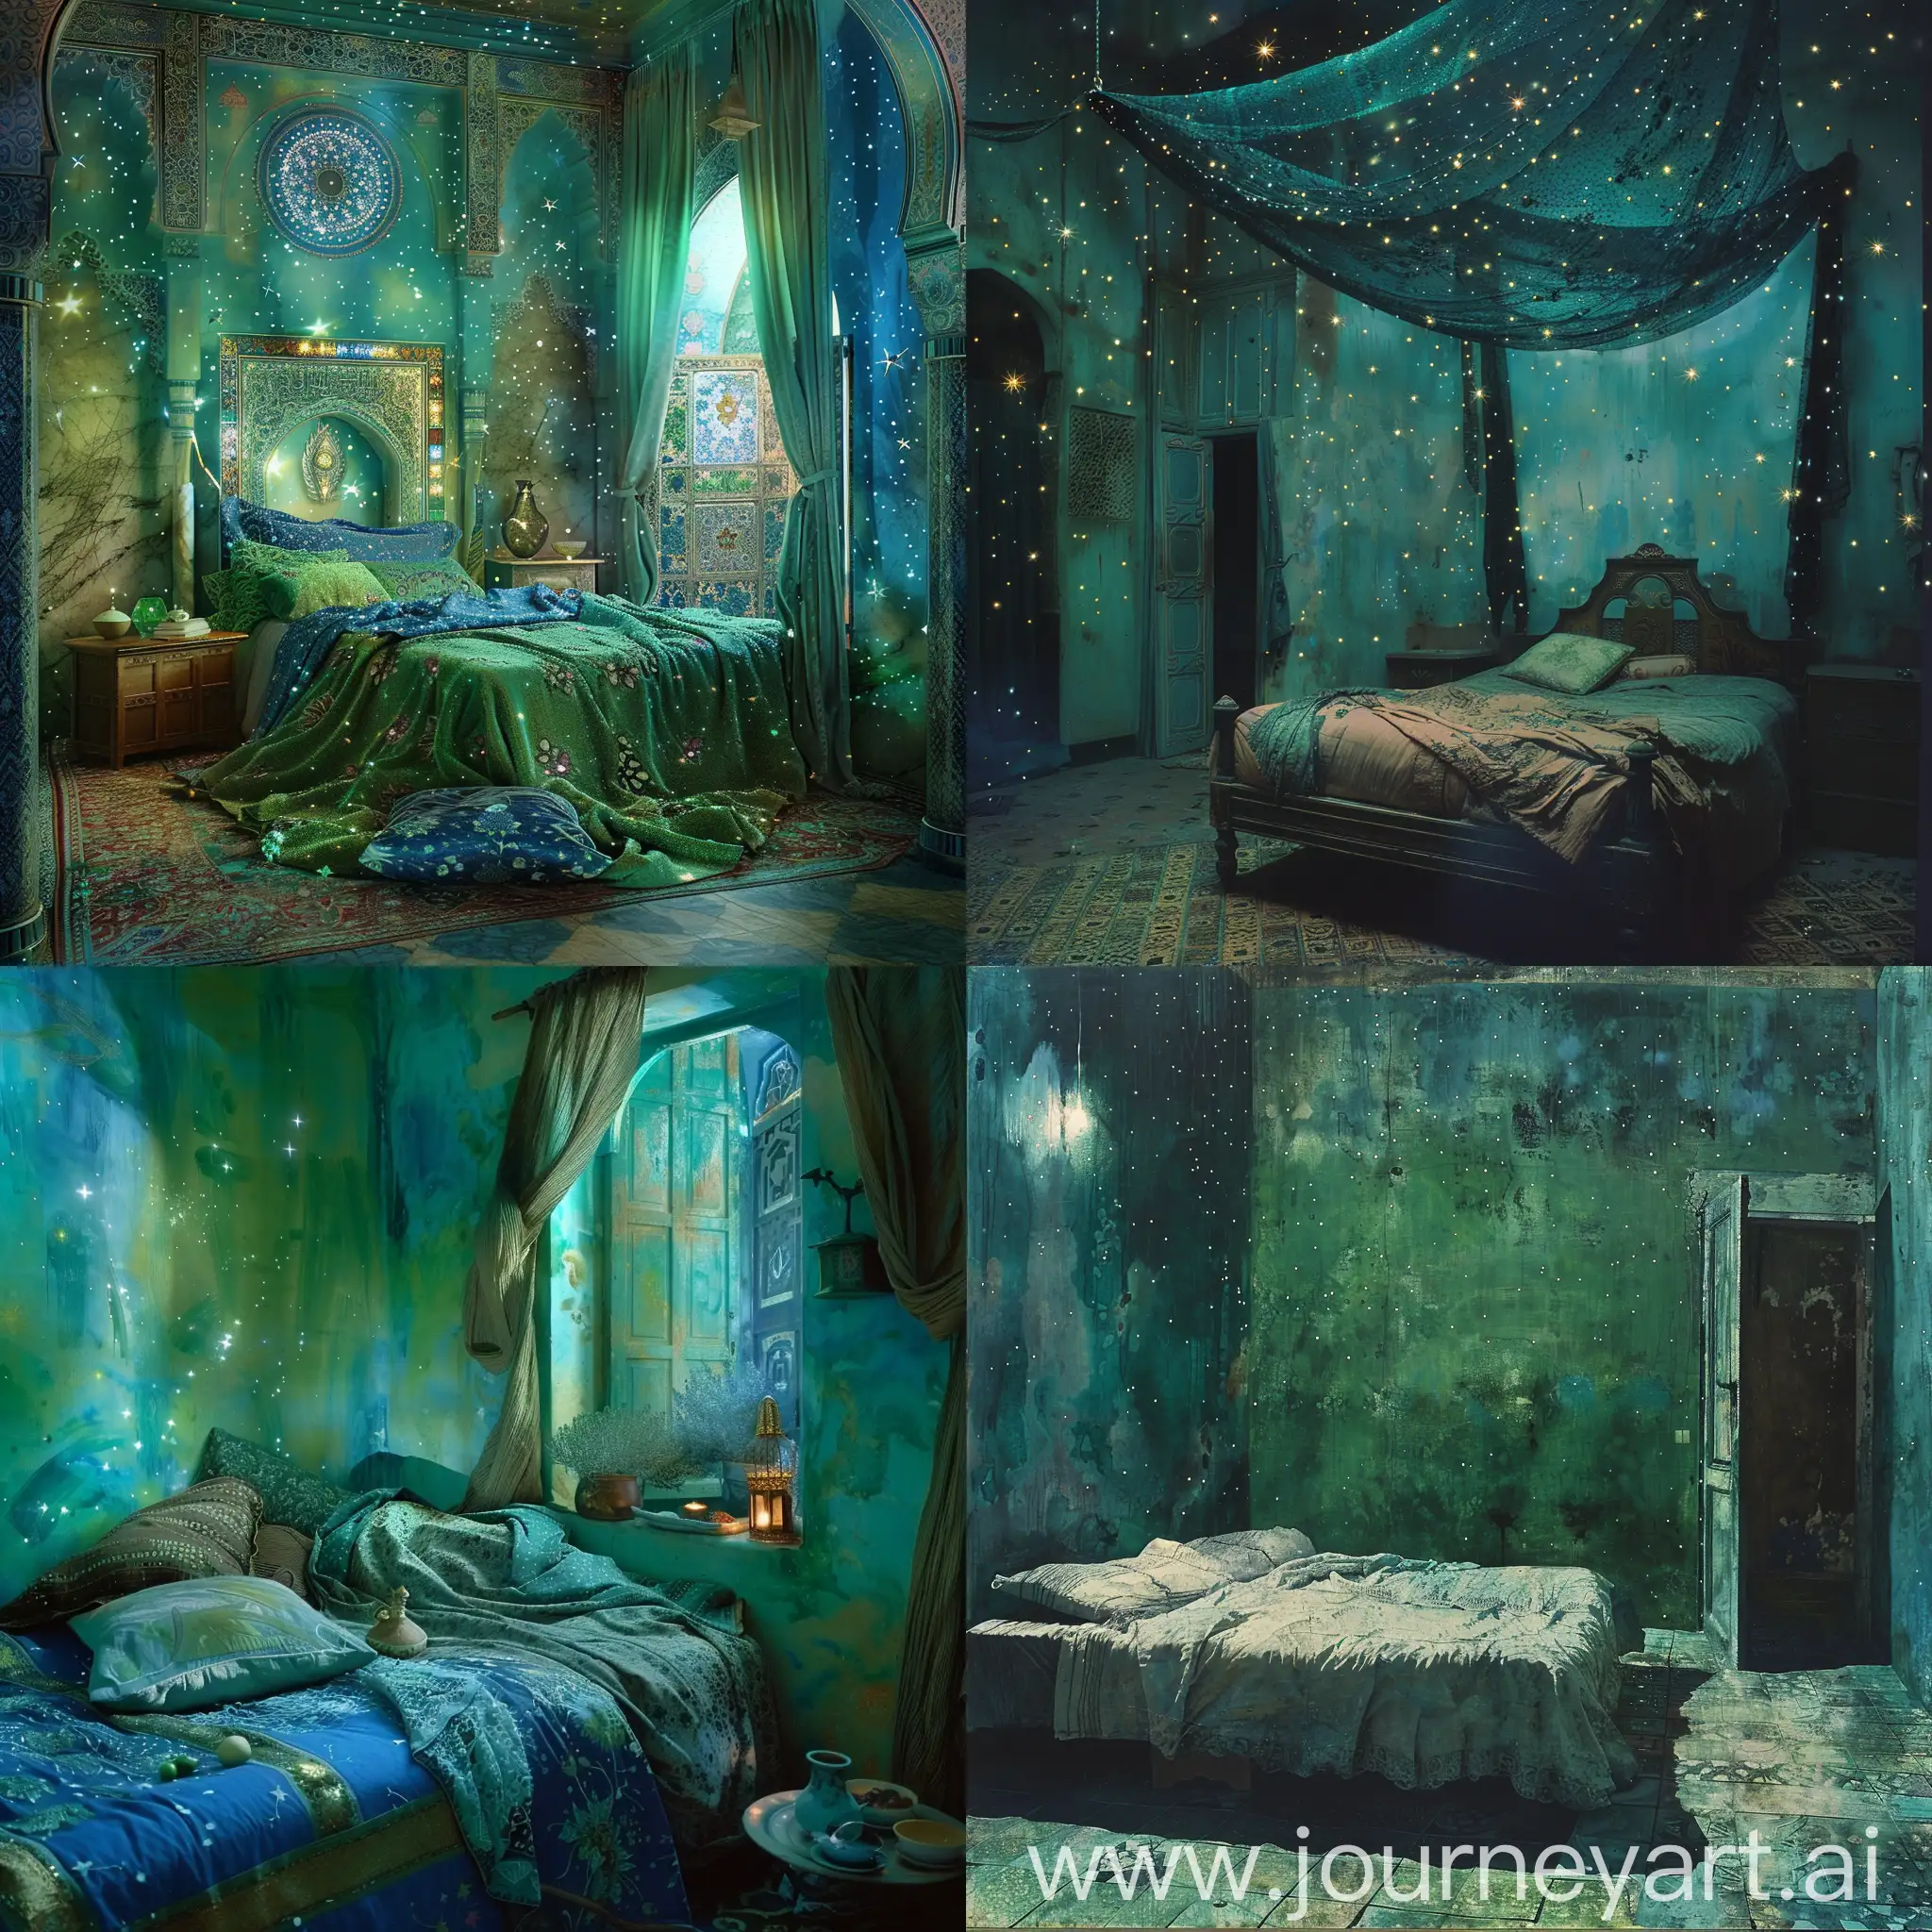 Syrian-Bedroom-with-Blue-and-Green-Accents-under-a-Starry-Sky